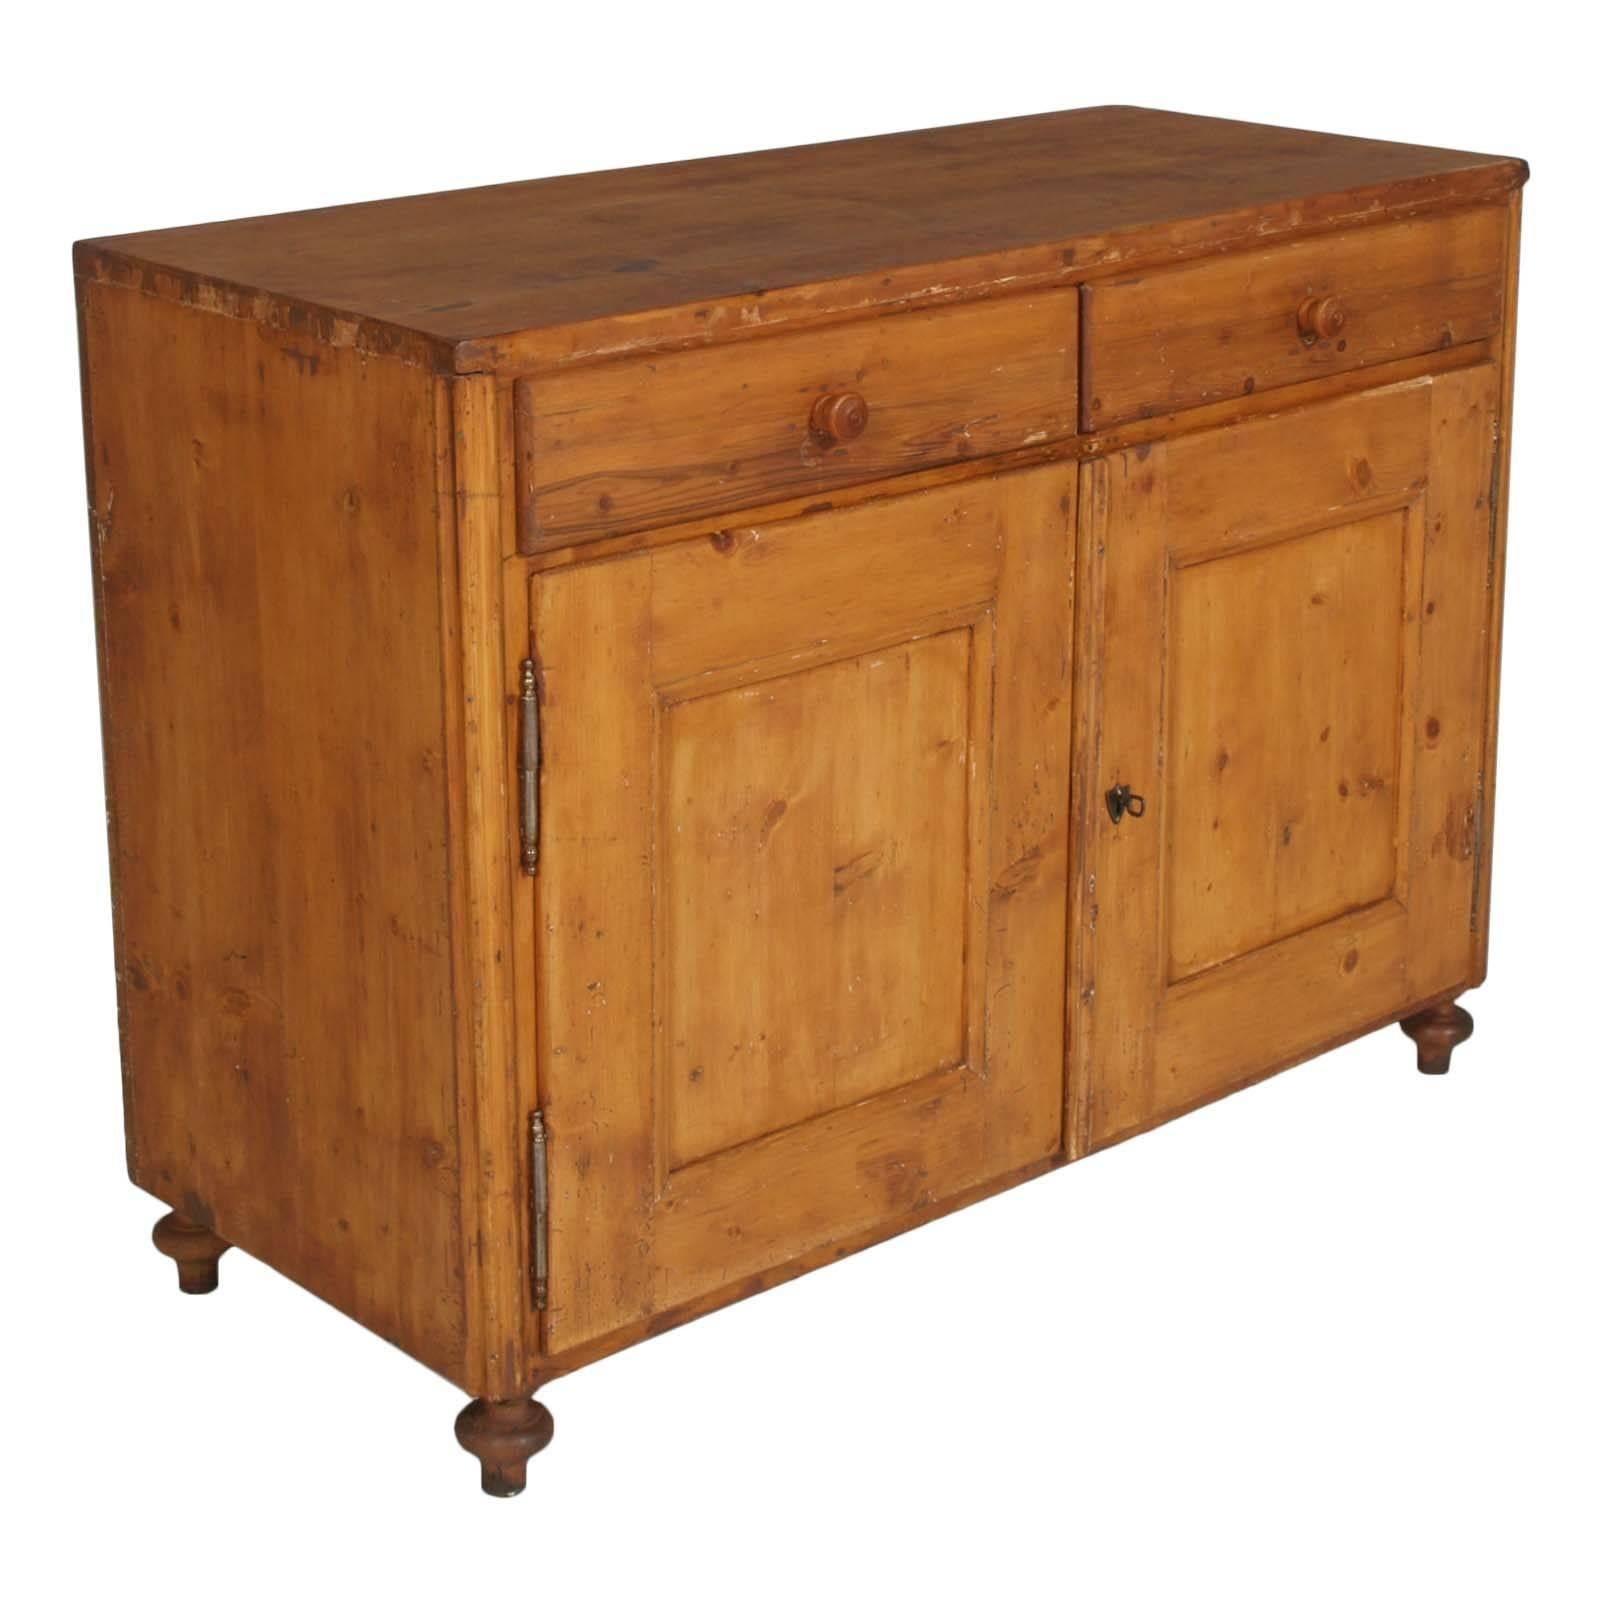 Austrian 19th Century Tyrol Credenza Sideboard, Solid Wood, Restored and Wax Finished For Sale